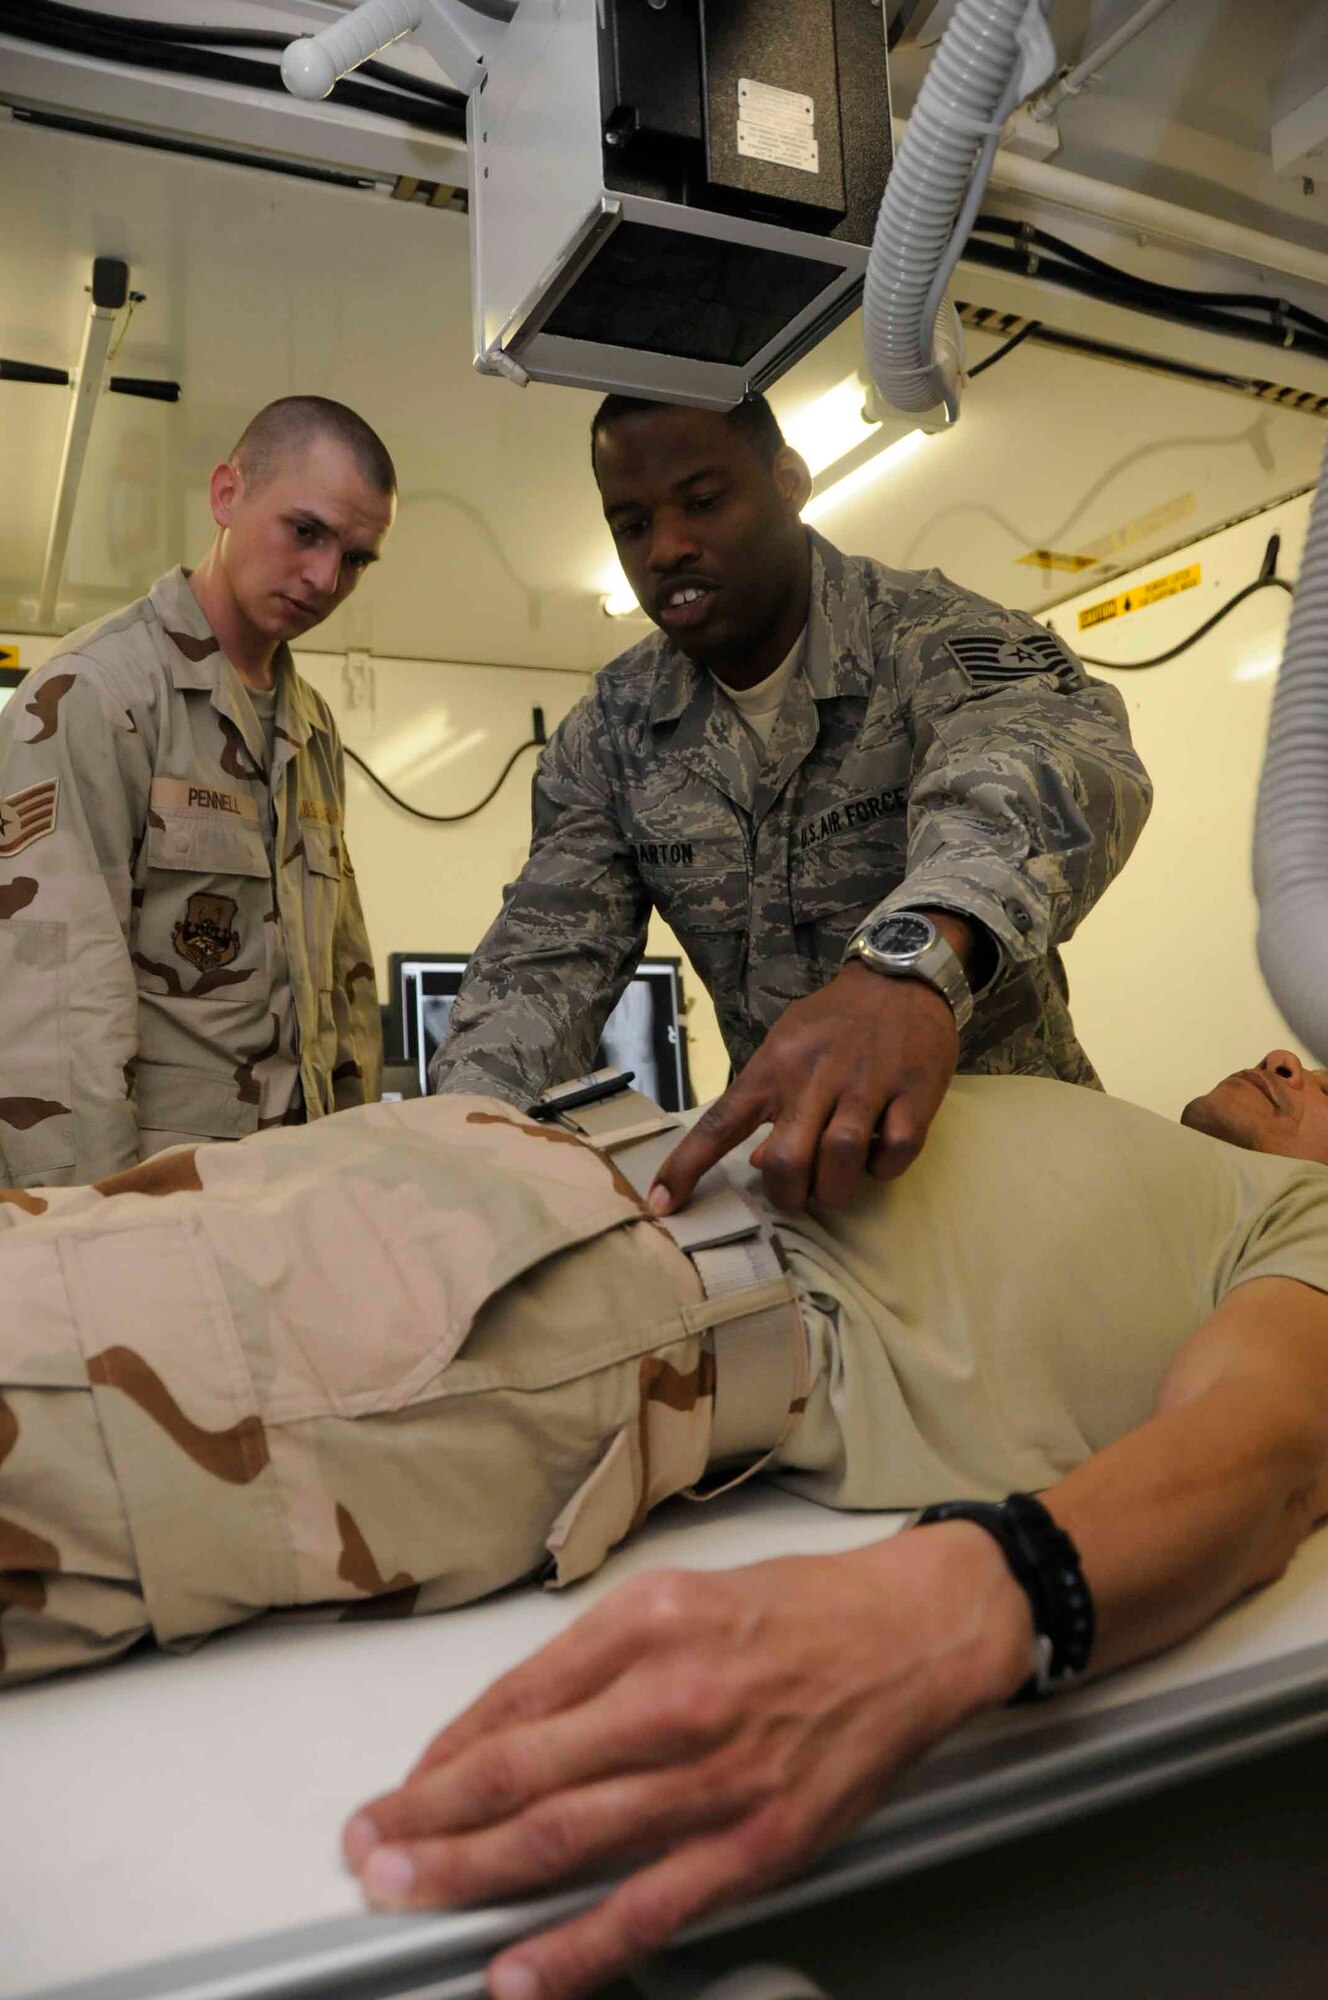 SOUTHWEST ASIA--Tech. Sgt. Robert Barton, 379th Expeditionary Medical Group, shows Staff Sgt. Jacob Pennell, 379th Expeditionary Maintenance Squadron, some radiology procedures at the medical group here June 24 as part of the Mentor/Shadow Program. (U.S. Air Force photo/ Senior Airman Domonique Simmons)